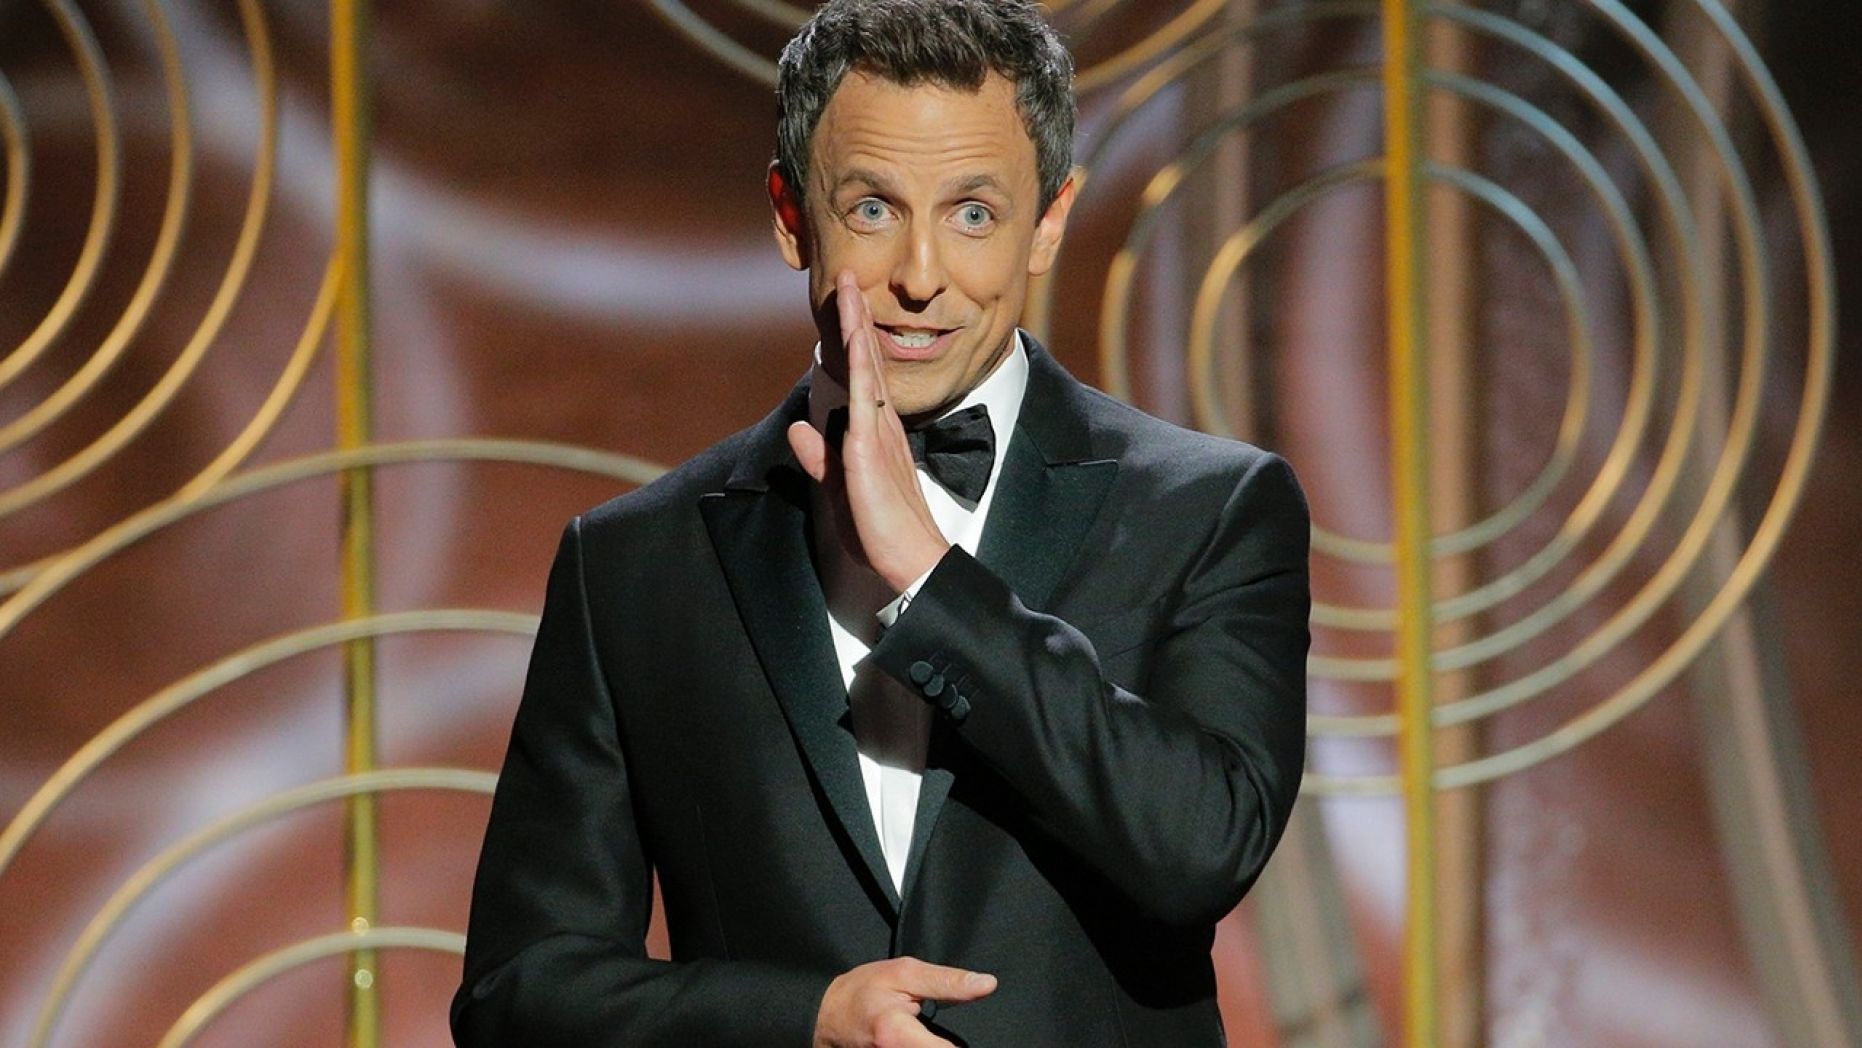 Seth Meyers Joked His Way Into 'Times Up' Movement At The Golden Globes